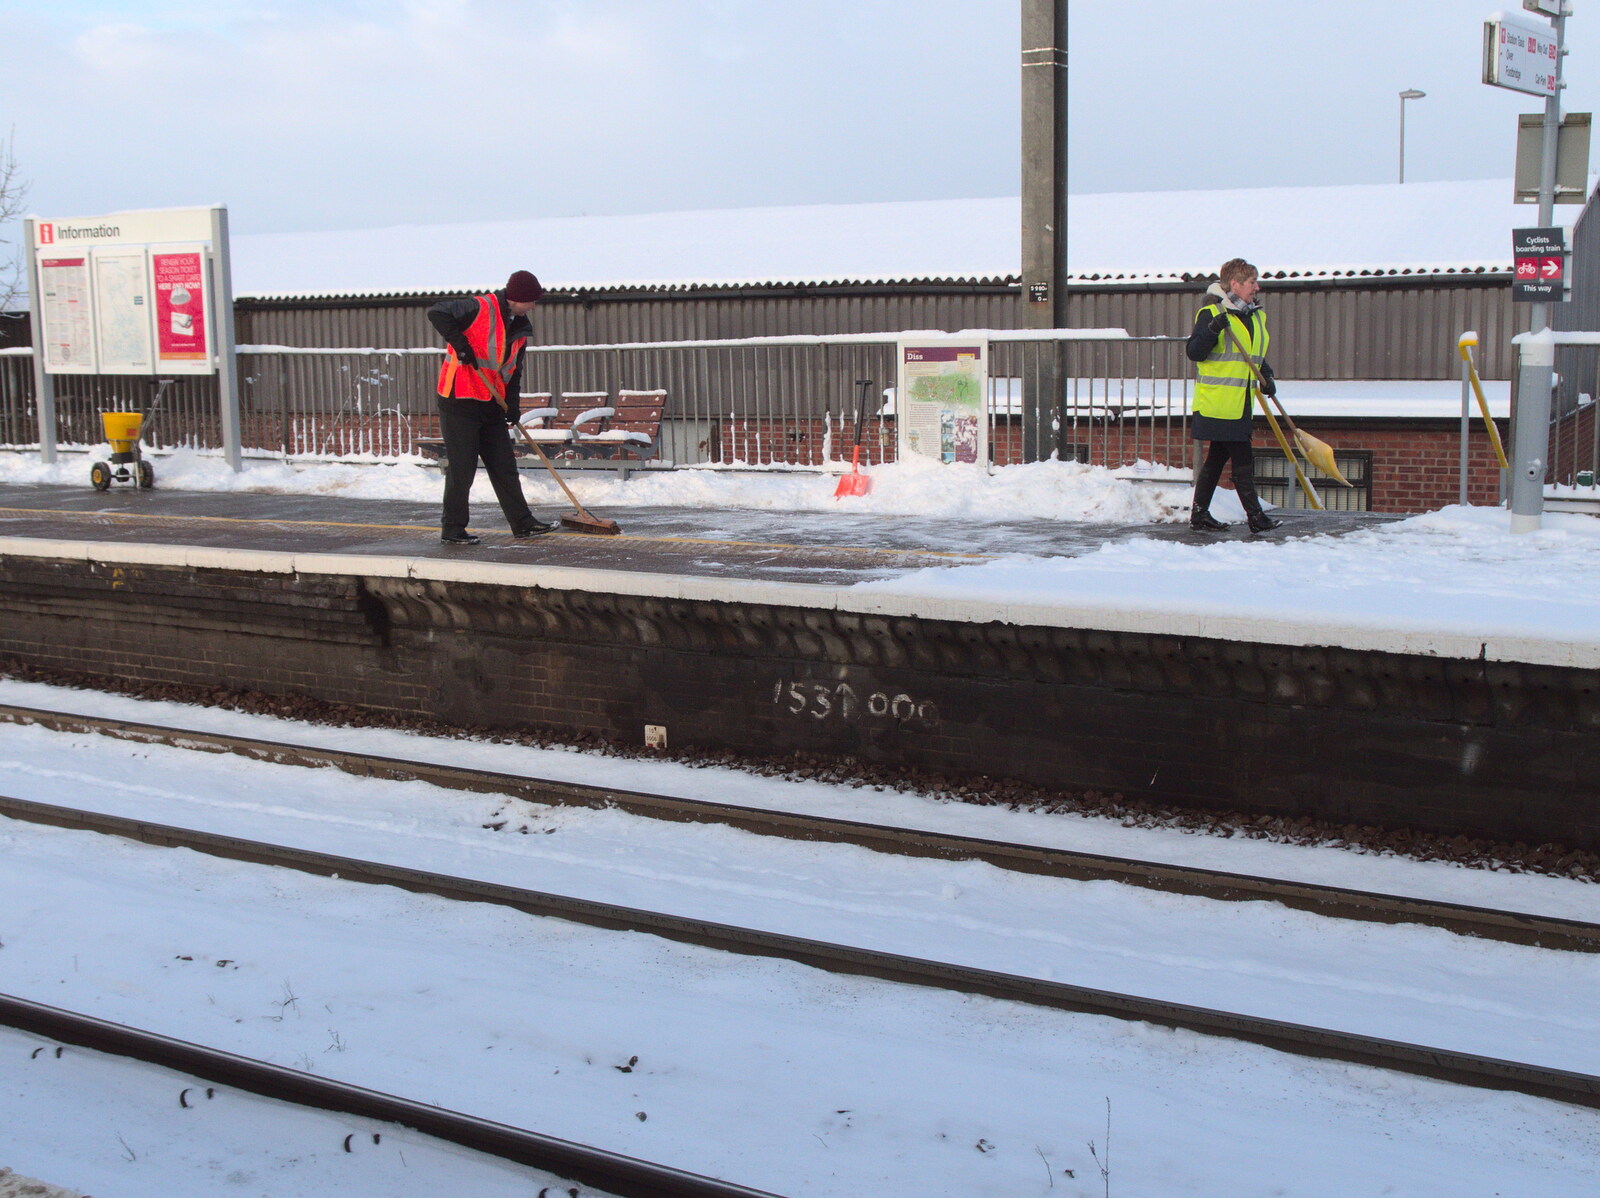 Snowmageddon: The Beast From the East, Suffolk and London - 27th February 2018: Down at Diss Station, the platform is being cleared